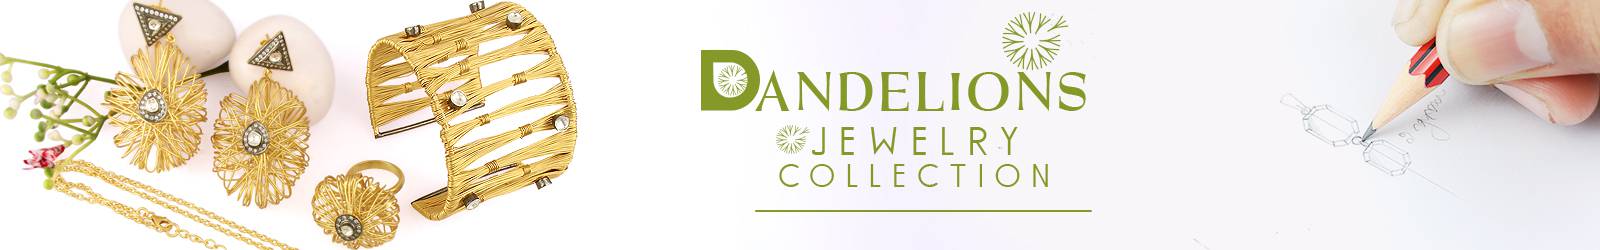 Dandelions Jewelry Collection